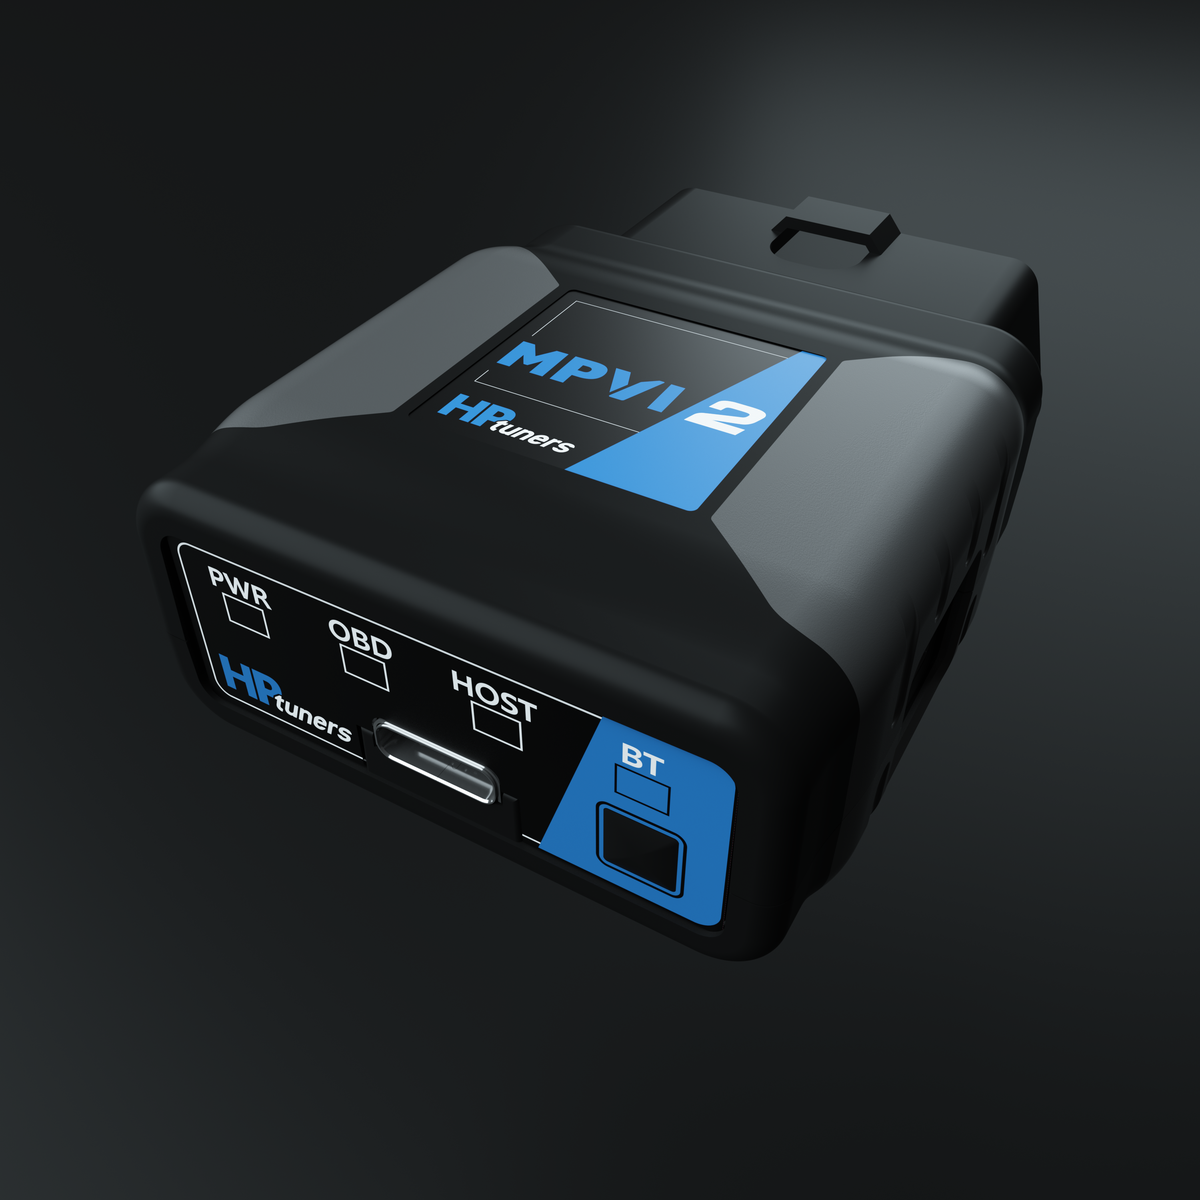 HP Tuners MPVI2 Plus, with 4 credits, The latest generation of hardware from HP Tuners, Replaces VCM Suite